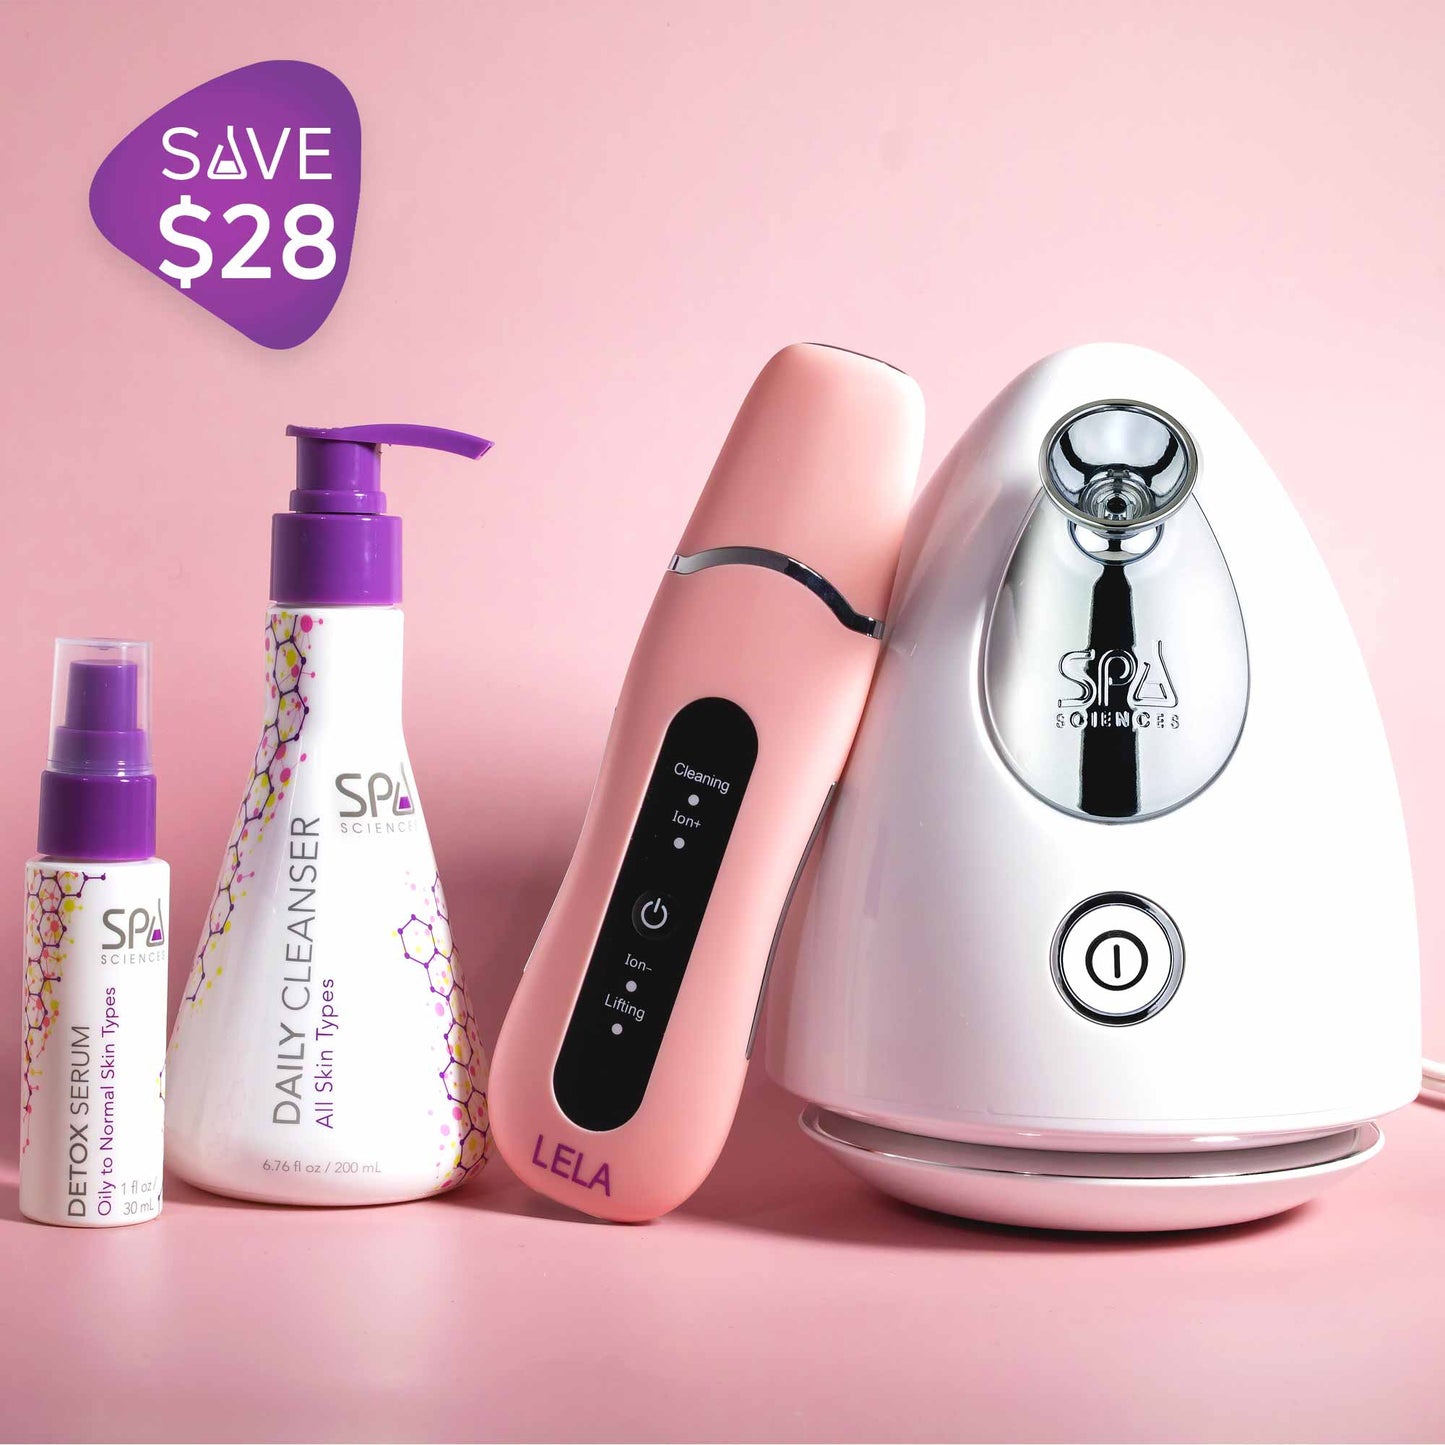 A Spa Sciences Pore Perfection Bundle with a high-quality hair dryer and a bottle of lotion.